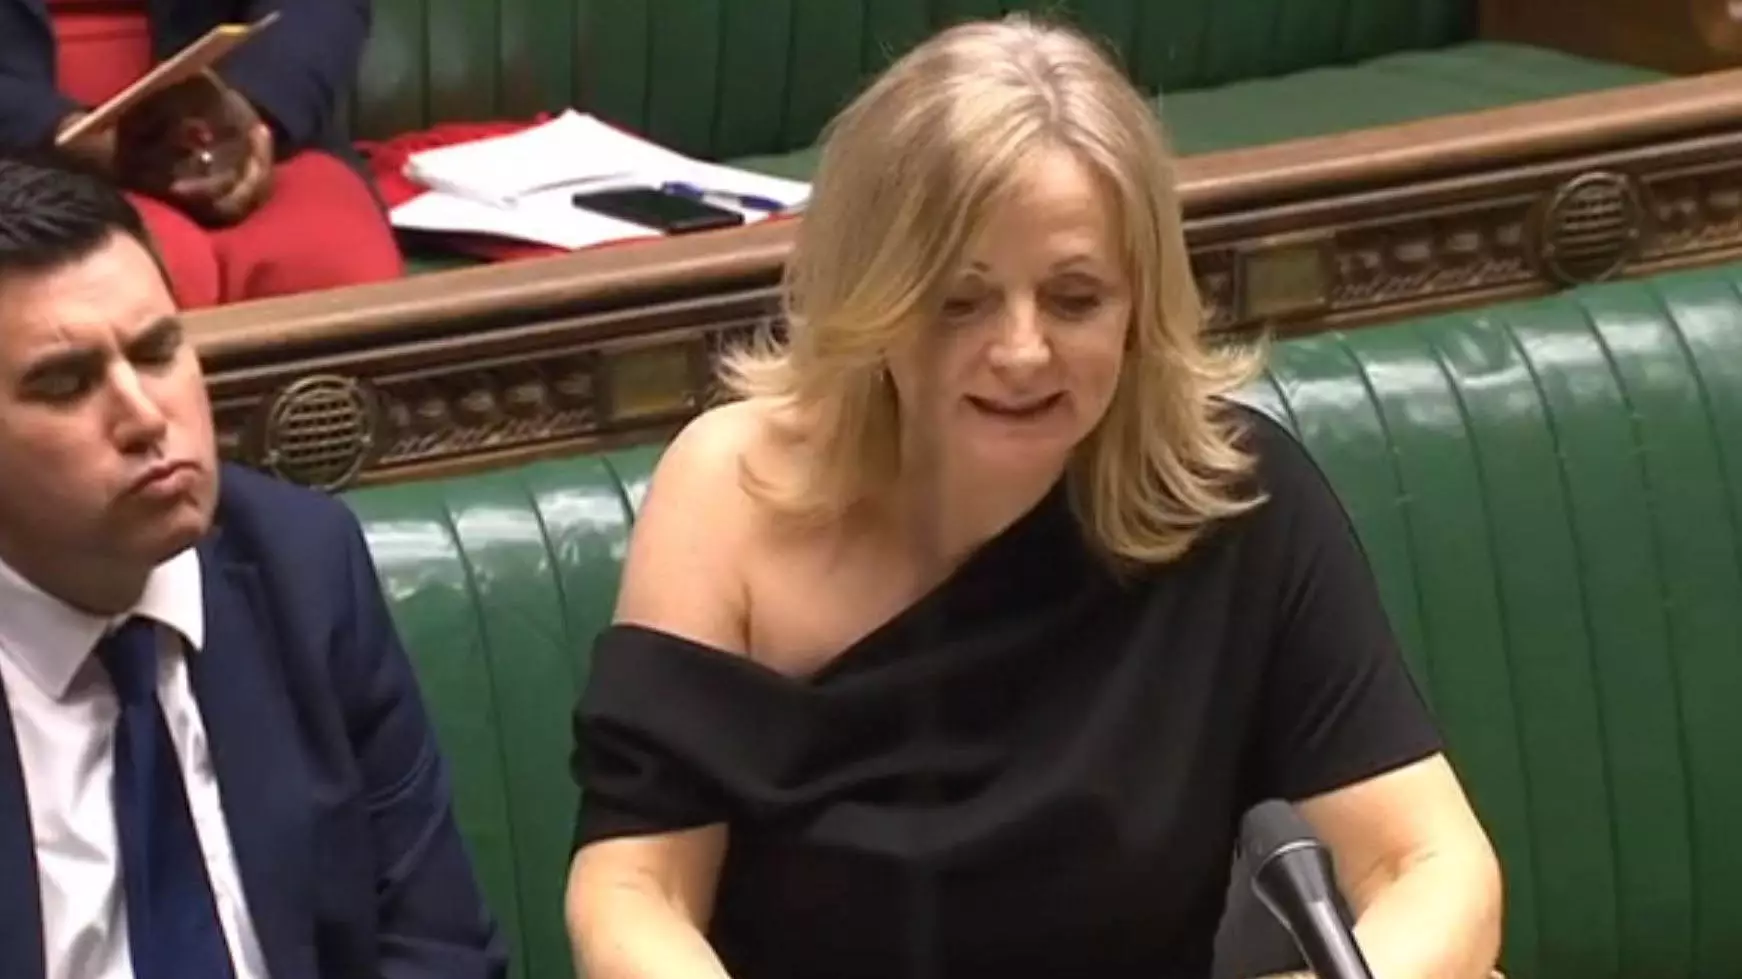 MP Tracy Brabin Hits Back After Online Trolls Criticise Her House of Commons Outfit